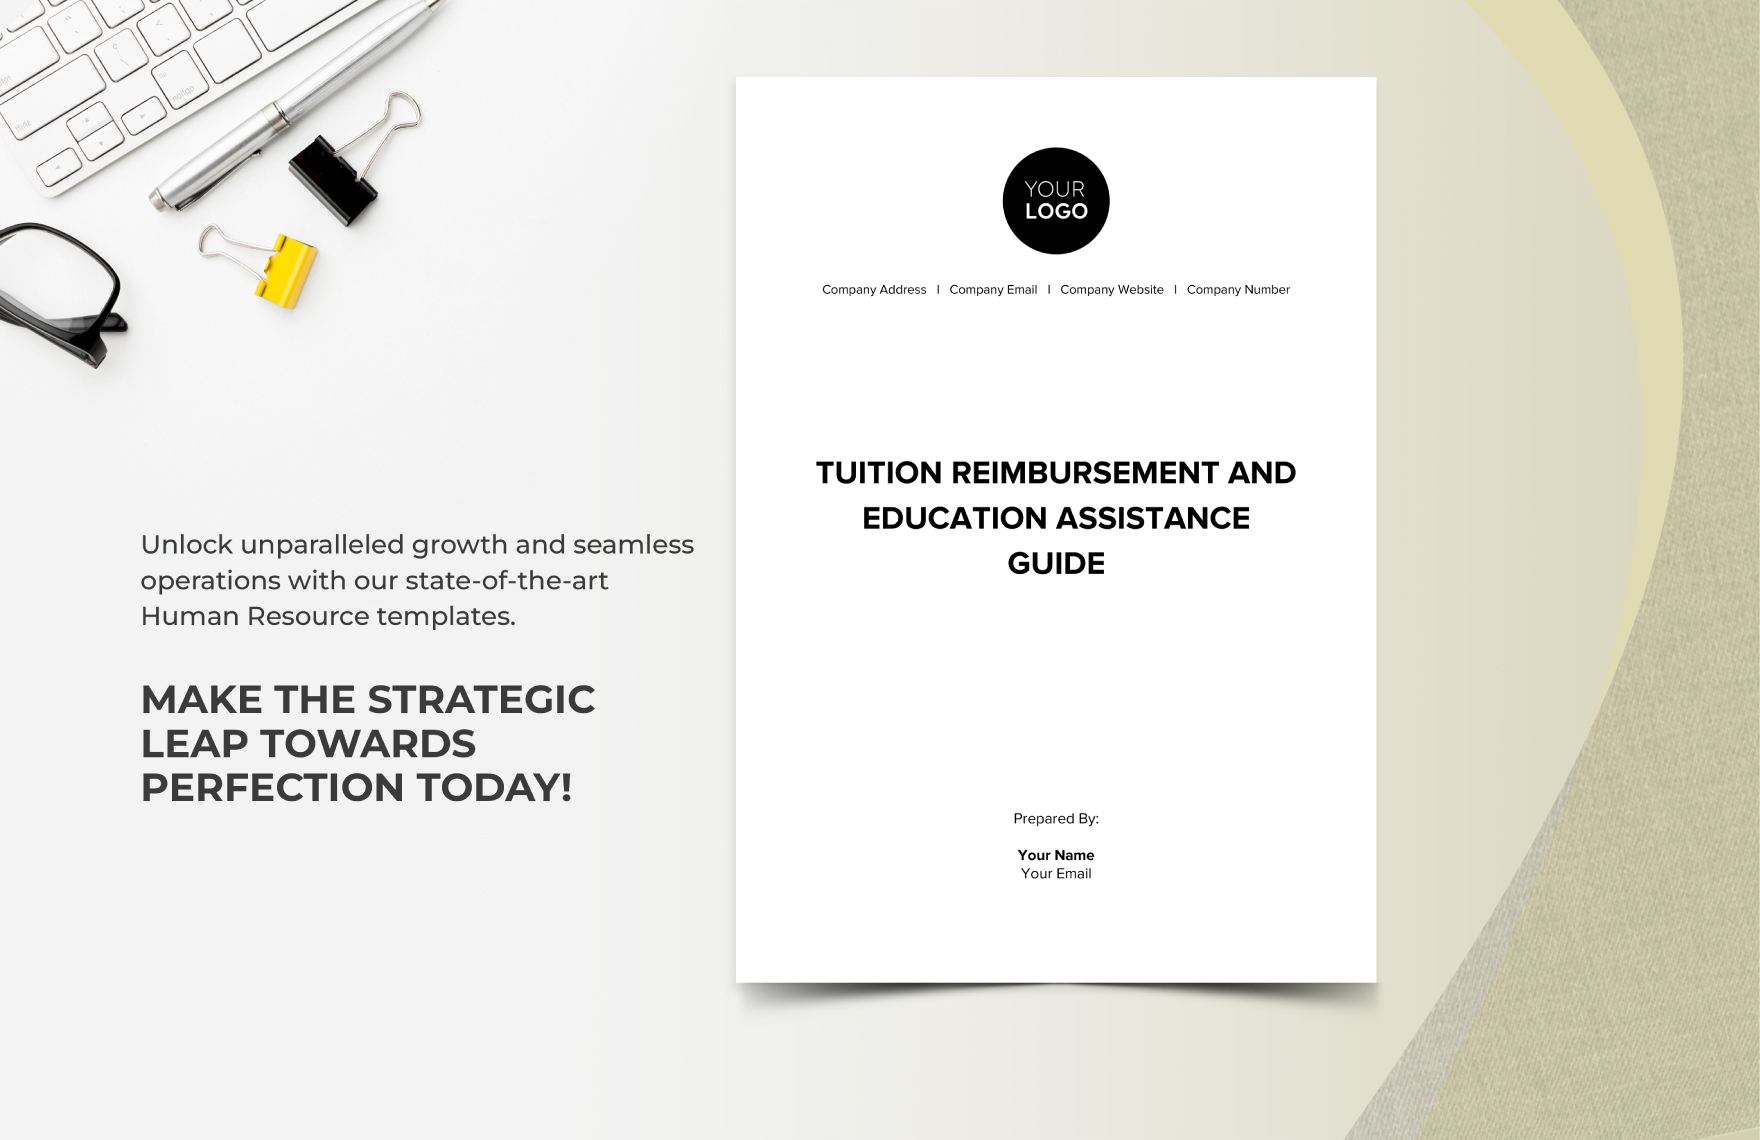 Tuition Reimbursement and Education Assistance Guide HR Template